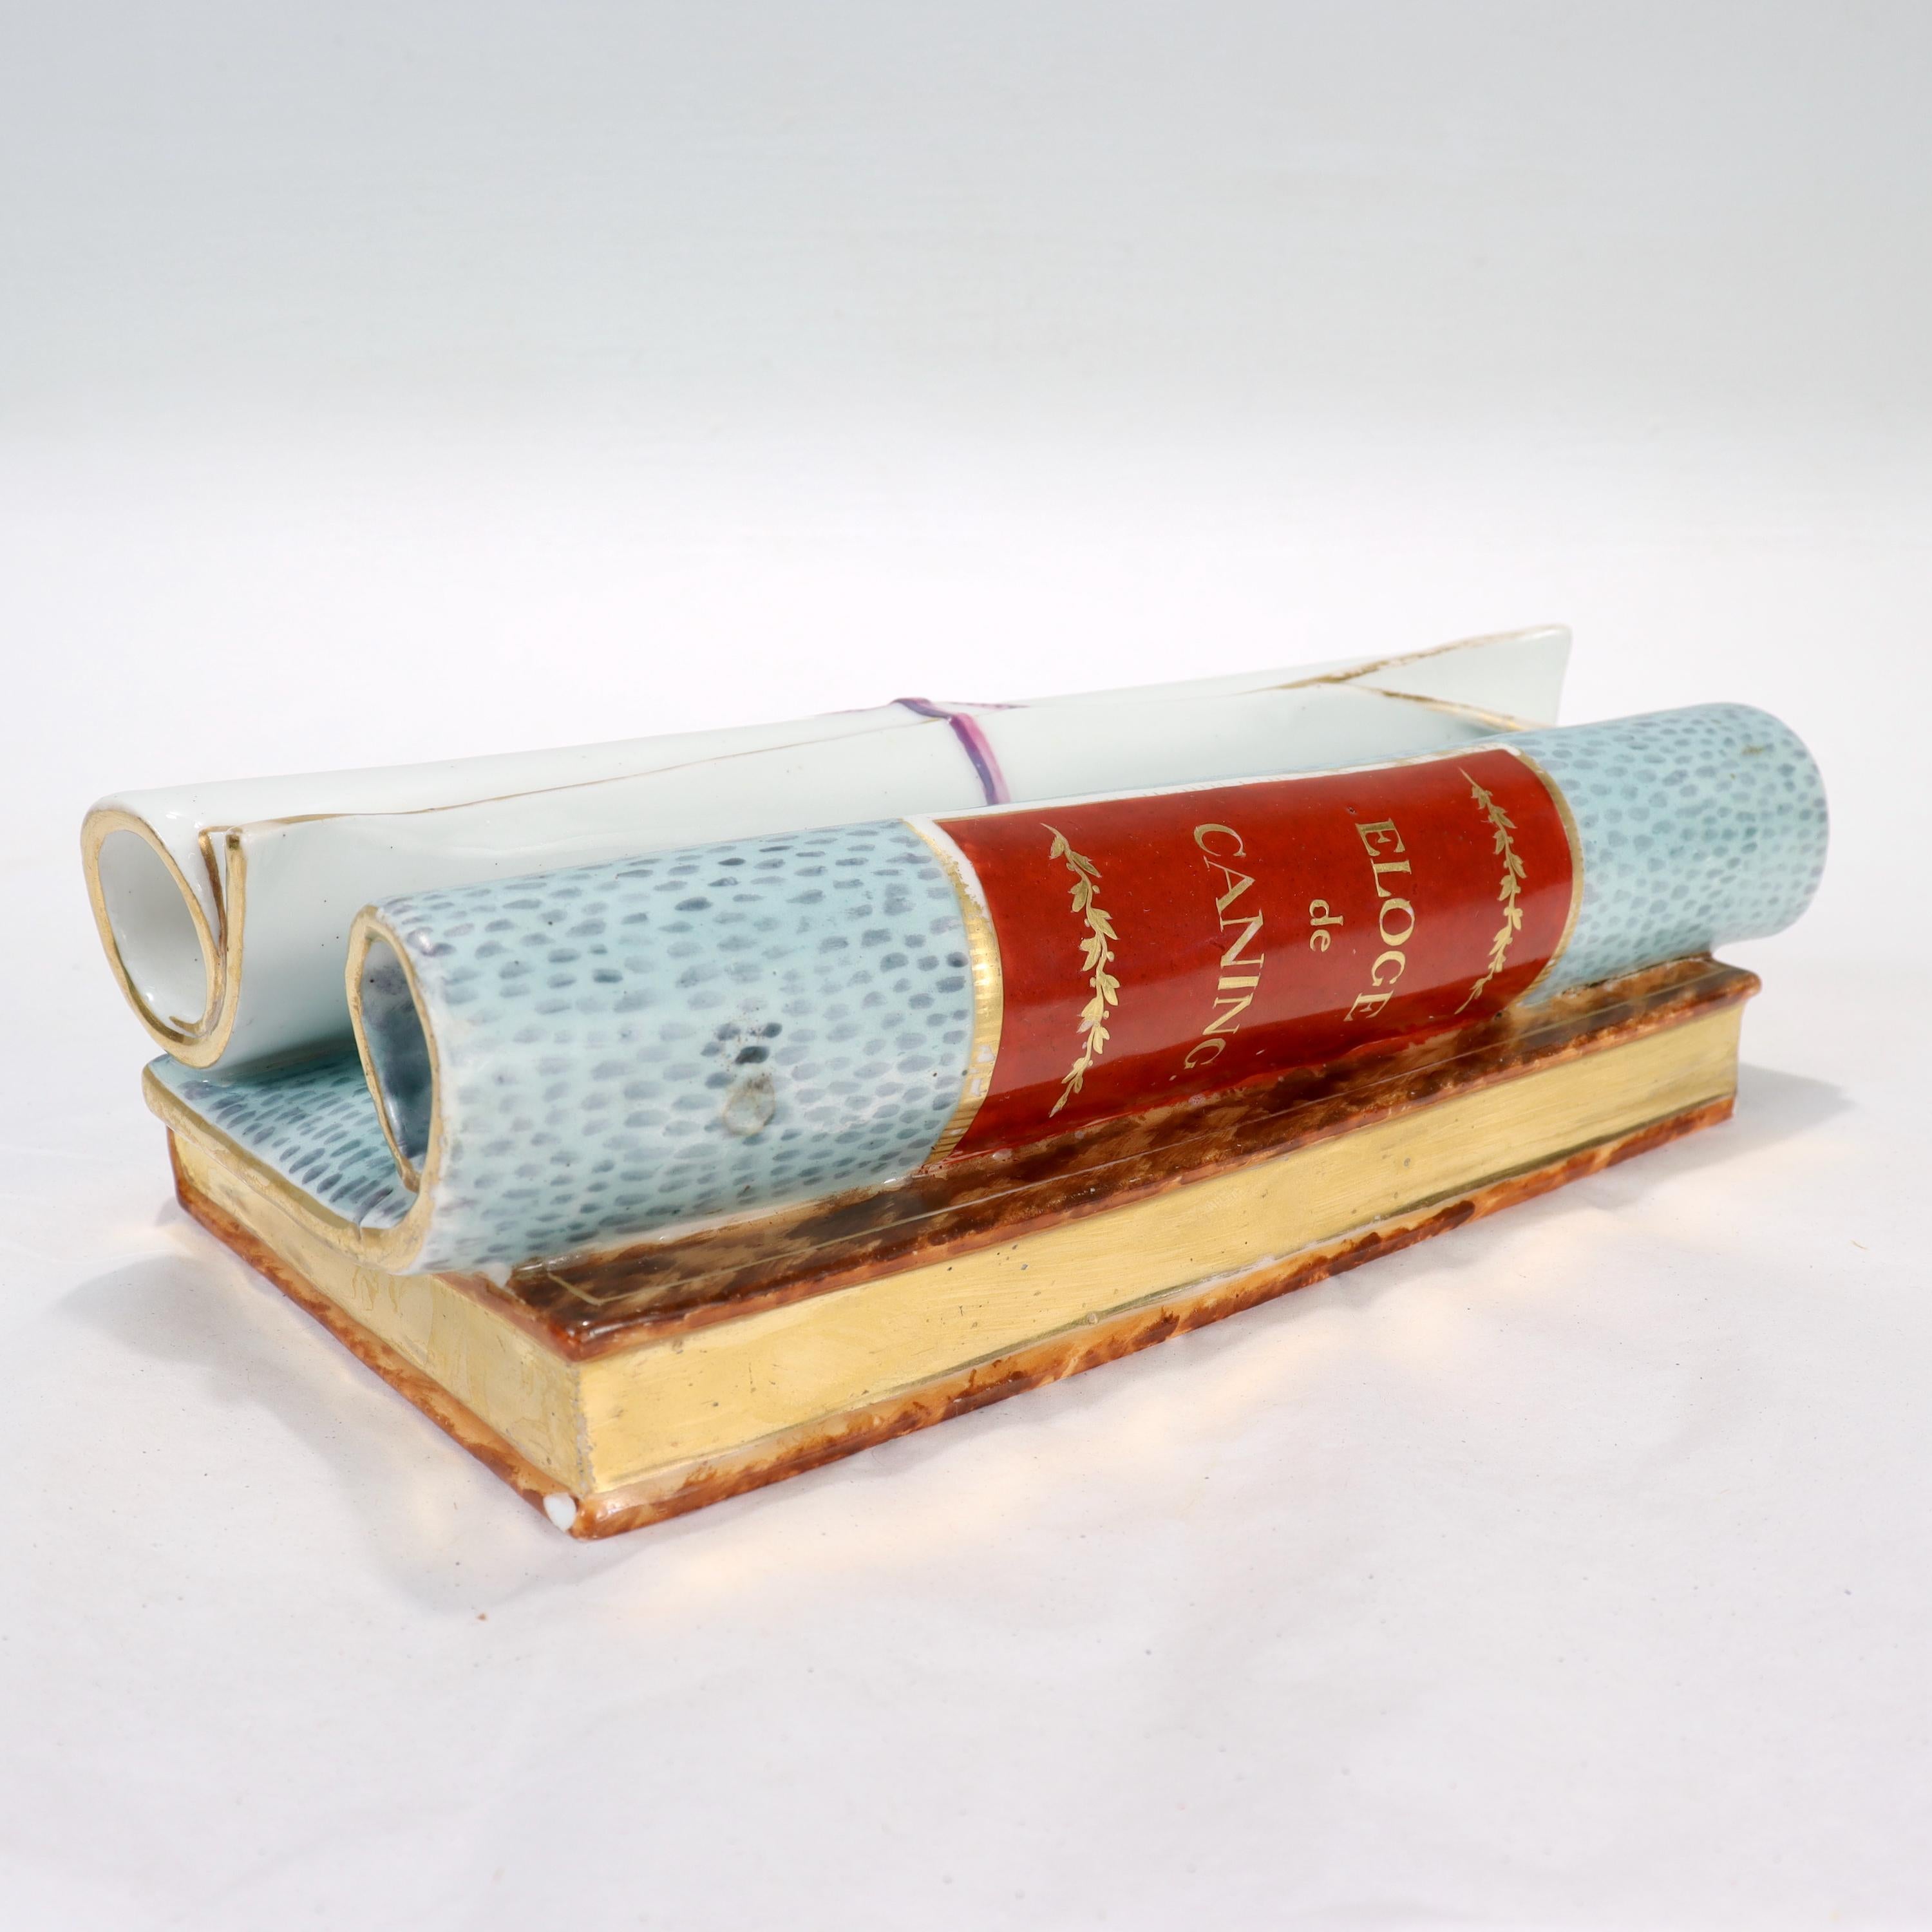 A fine antique French porcelain Trompe L'oeil paperweight or sculpture. 

In the form of a book with 2 scrolls stacked on top of it. 

The book's spine reads 'Biron' (likely the memoir of Armand Louis de Gontaut), while one of the scrolls is